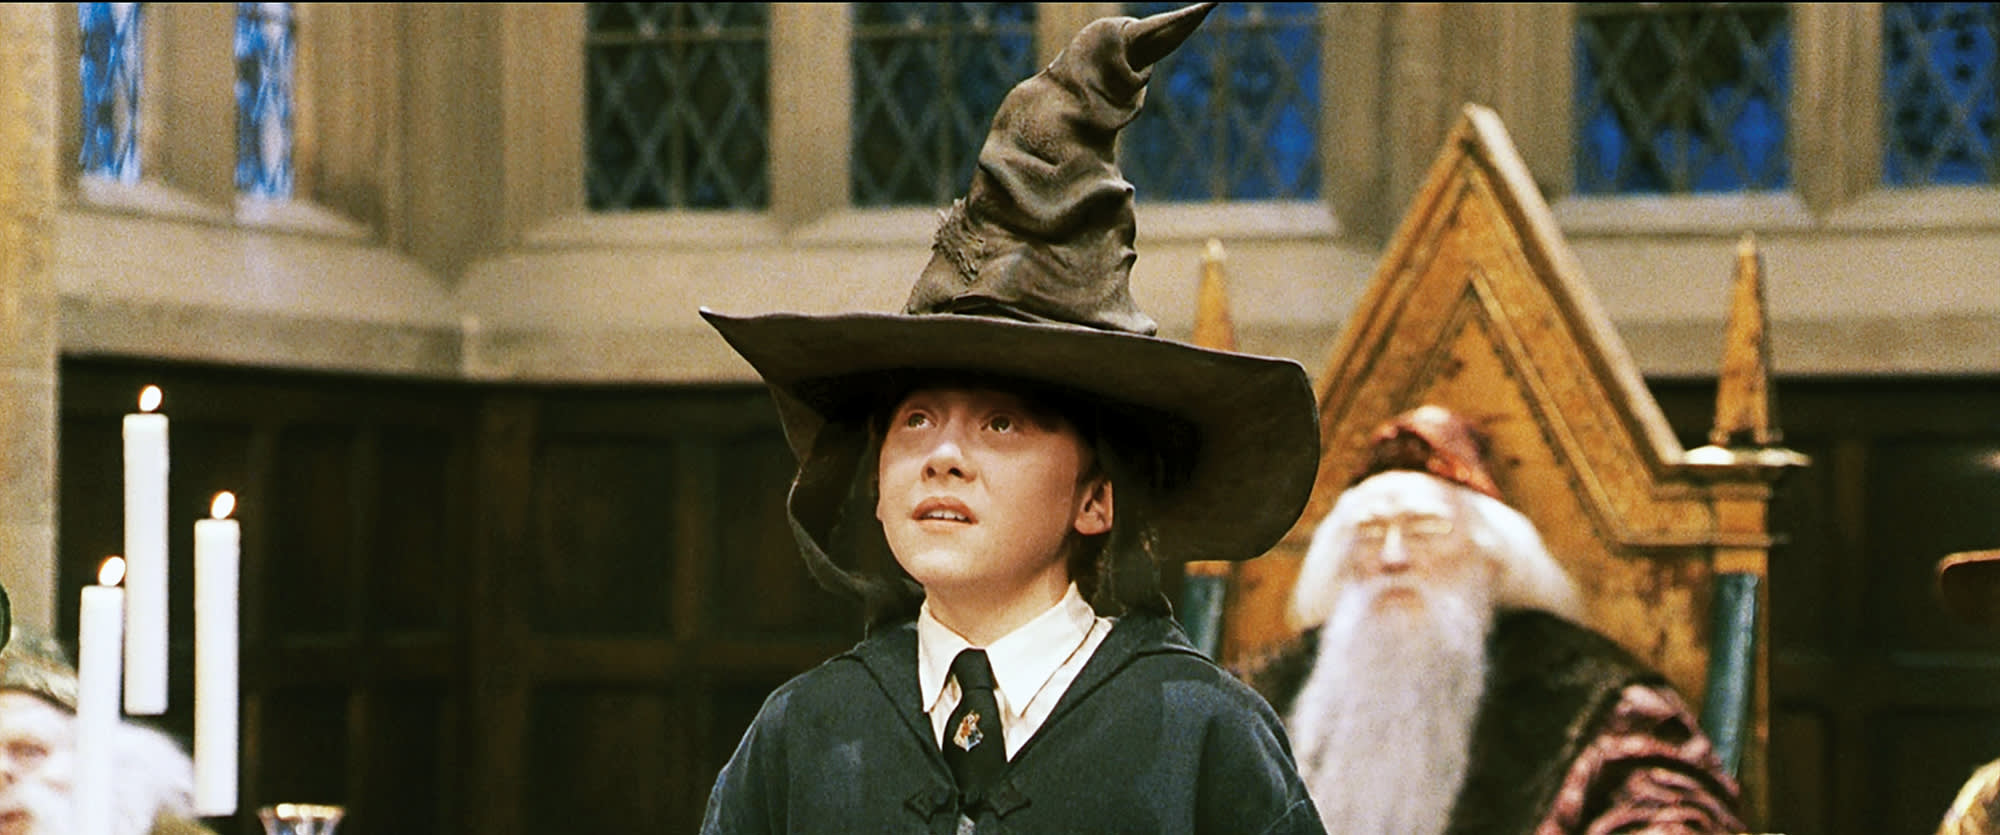 HP-F1-philosophers-stone-ron-sorting-hat-looking-concerned-web-landscape